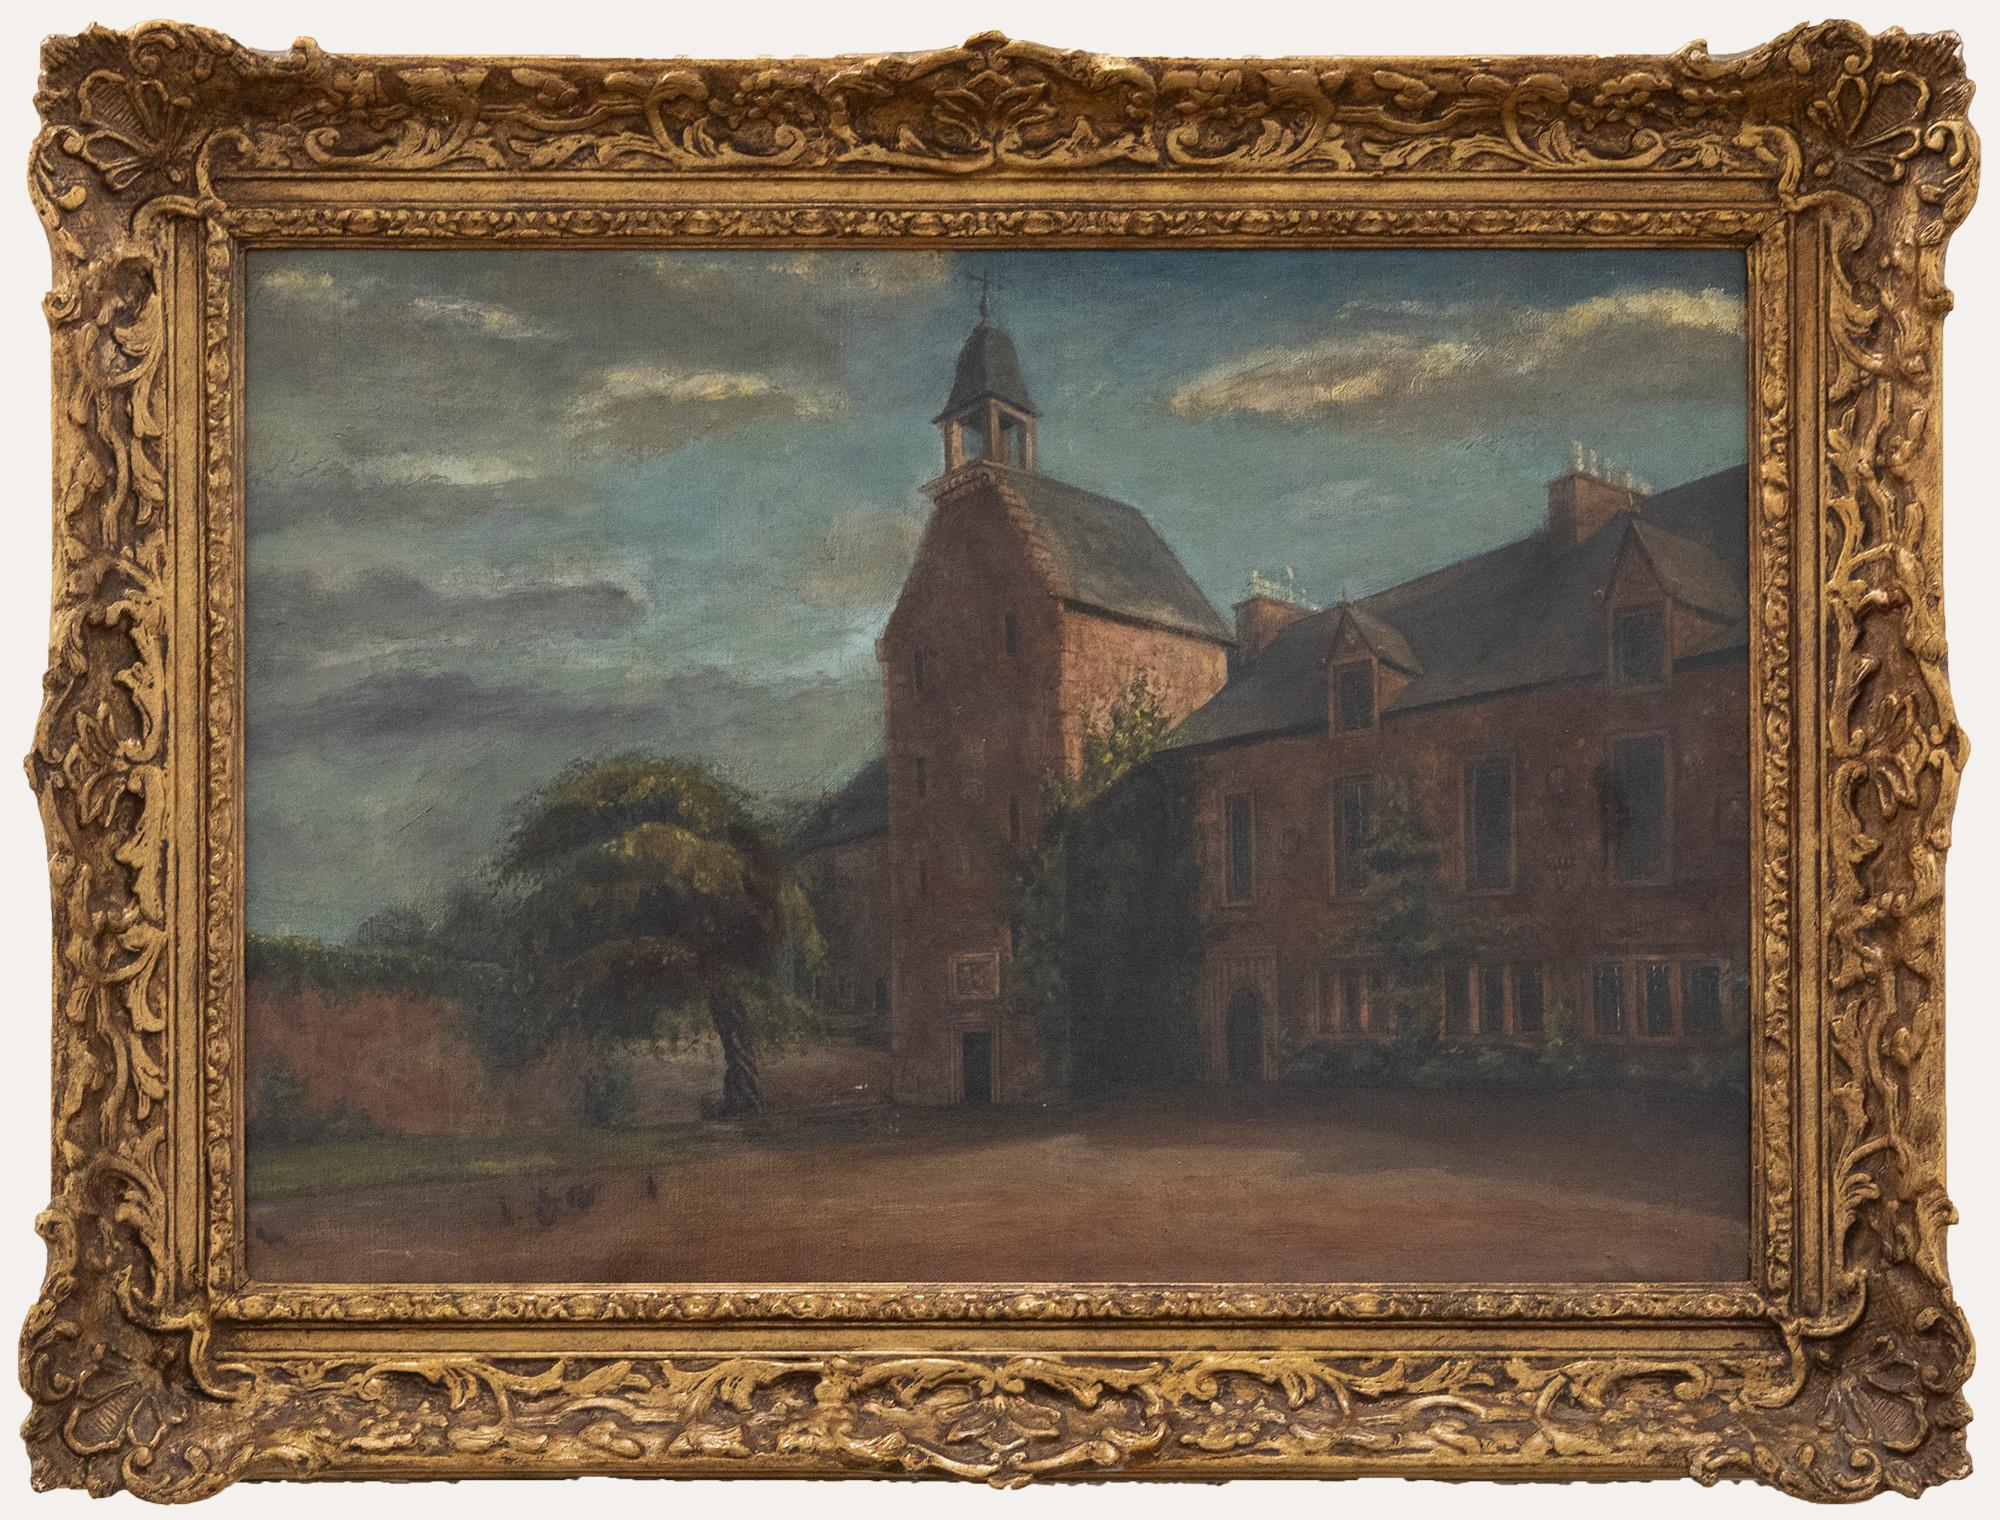 Unknown Landscape Painting - Late 19th Century Oil - A Country House with Chickens